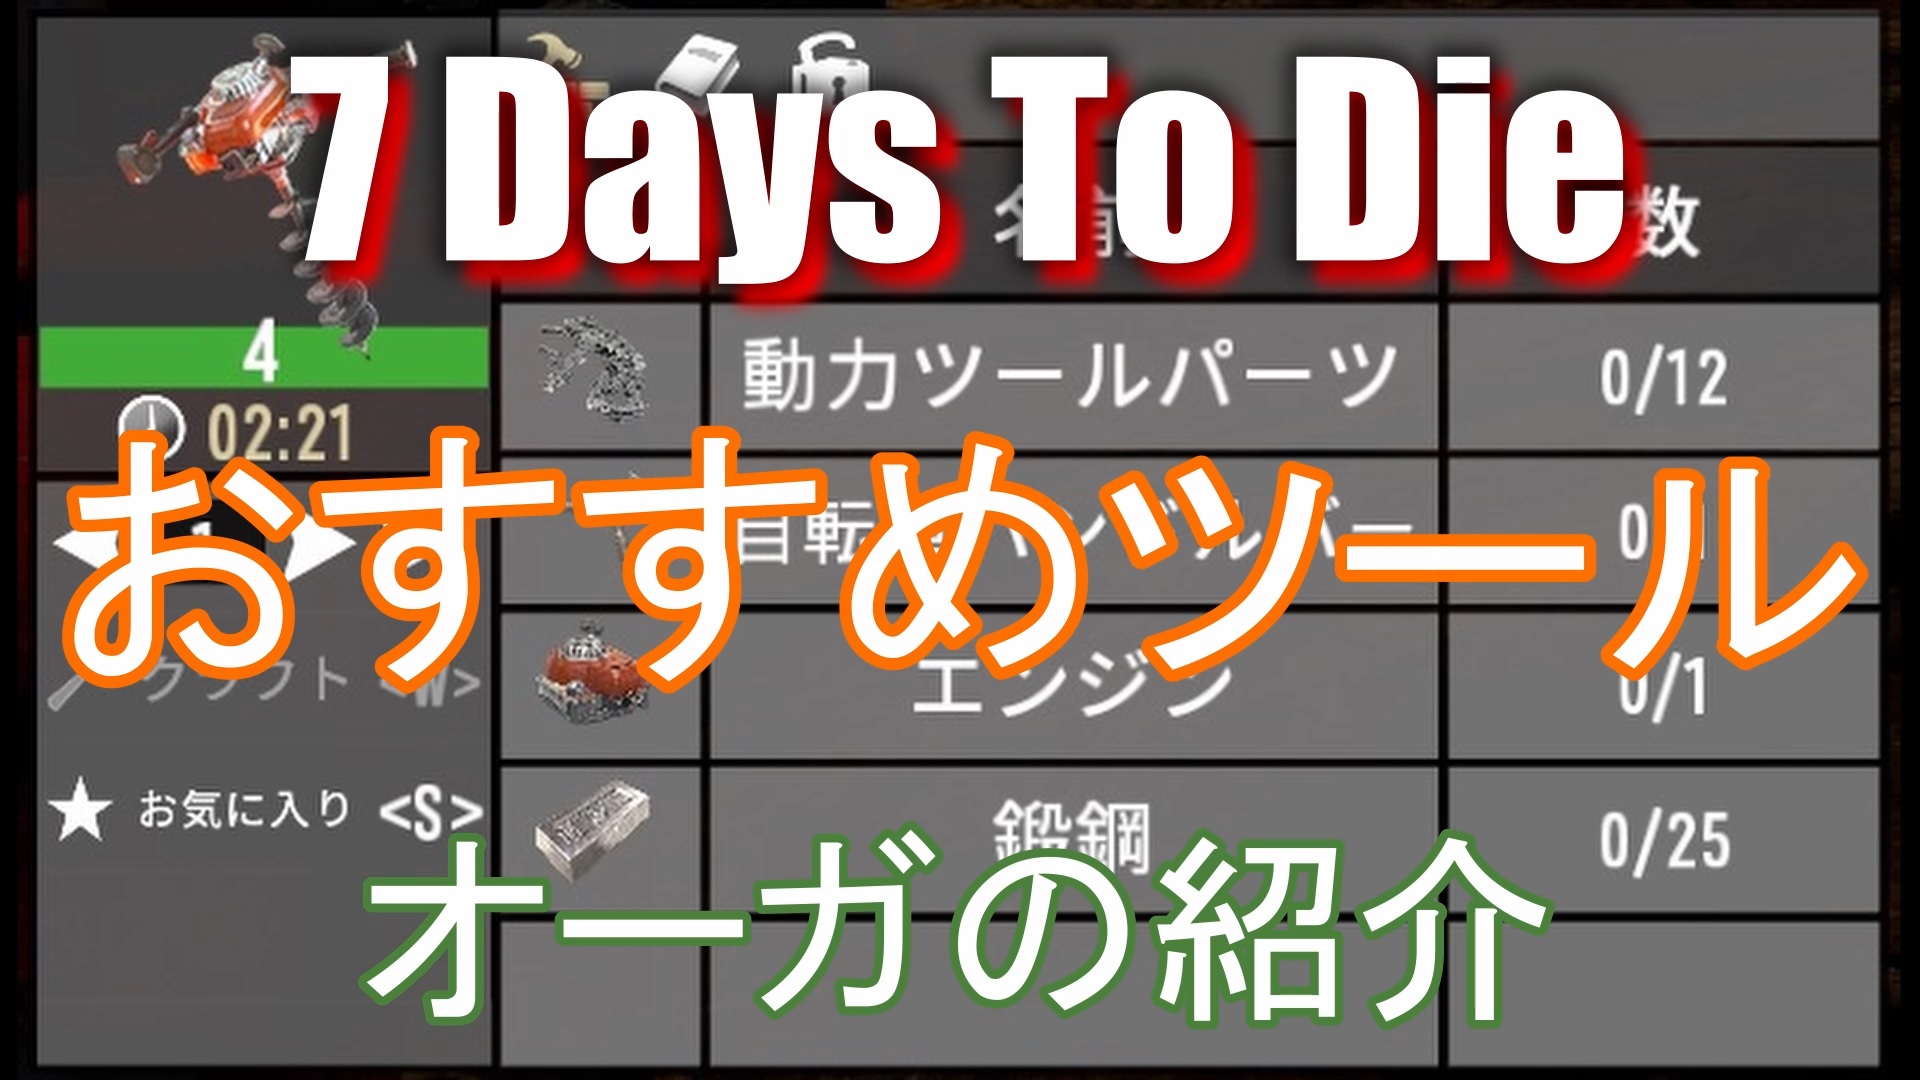 7 Days To Die A19 2 おすすめツール紹介 オーガで採掘効率が超アップ Steamゲーマー戦記